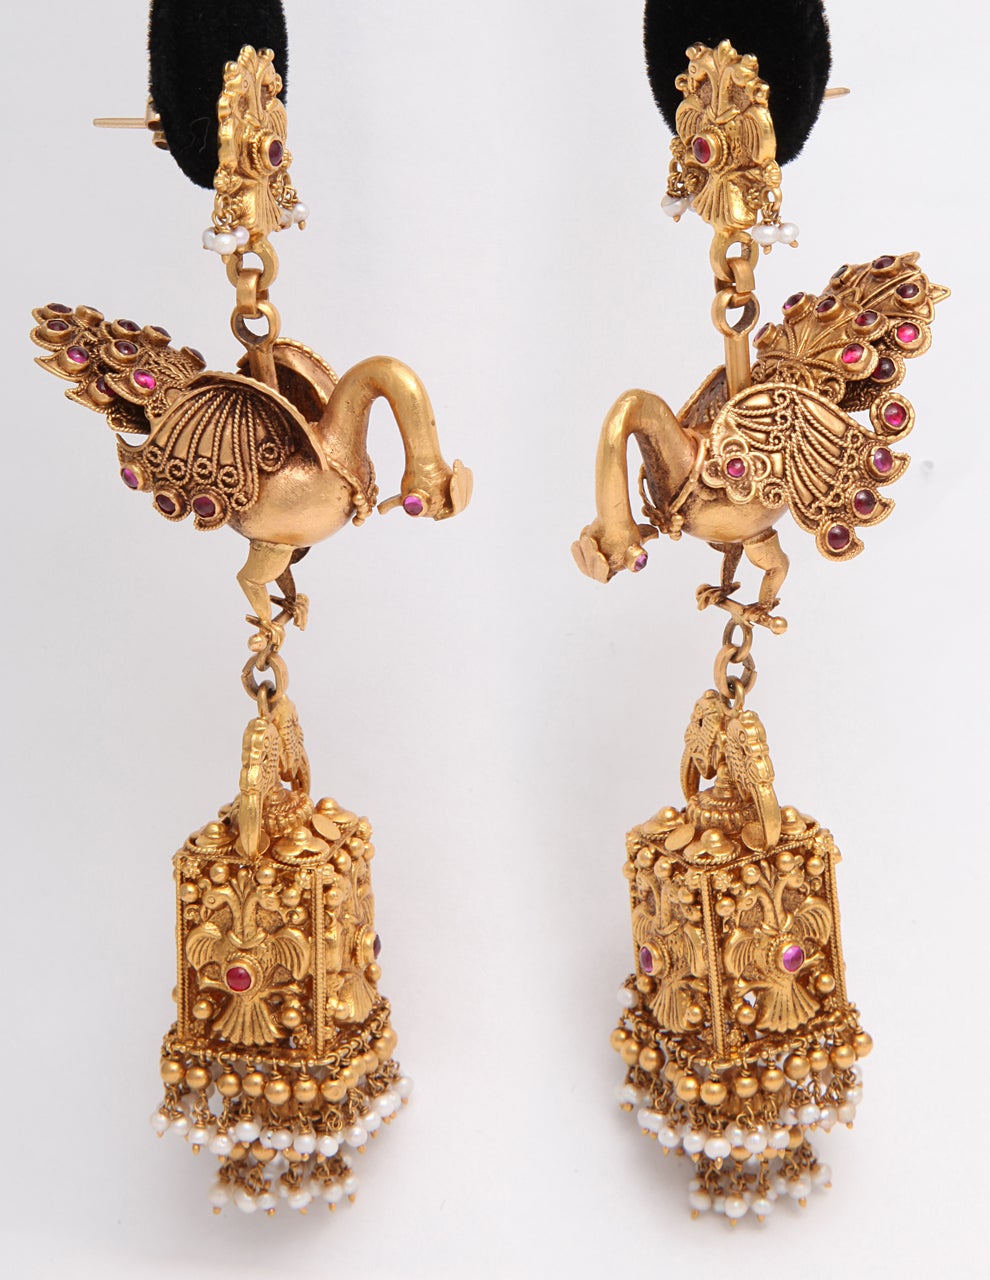 A pair of earrings composed of 18kt yellow gold peacocks with bezel set cabochon ruby eyes and feathers. The peacocks suspend 18kt yellow gold  cages. The cages showcase four bird plaques. The cages have 18kt yellow gold and pearl fringe at the